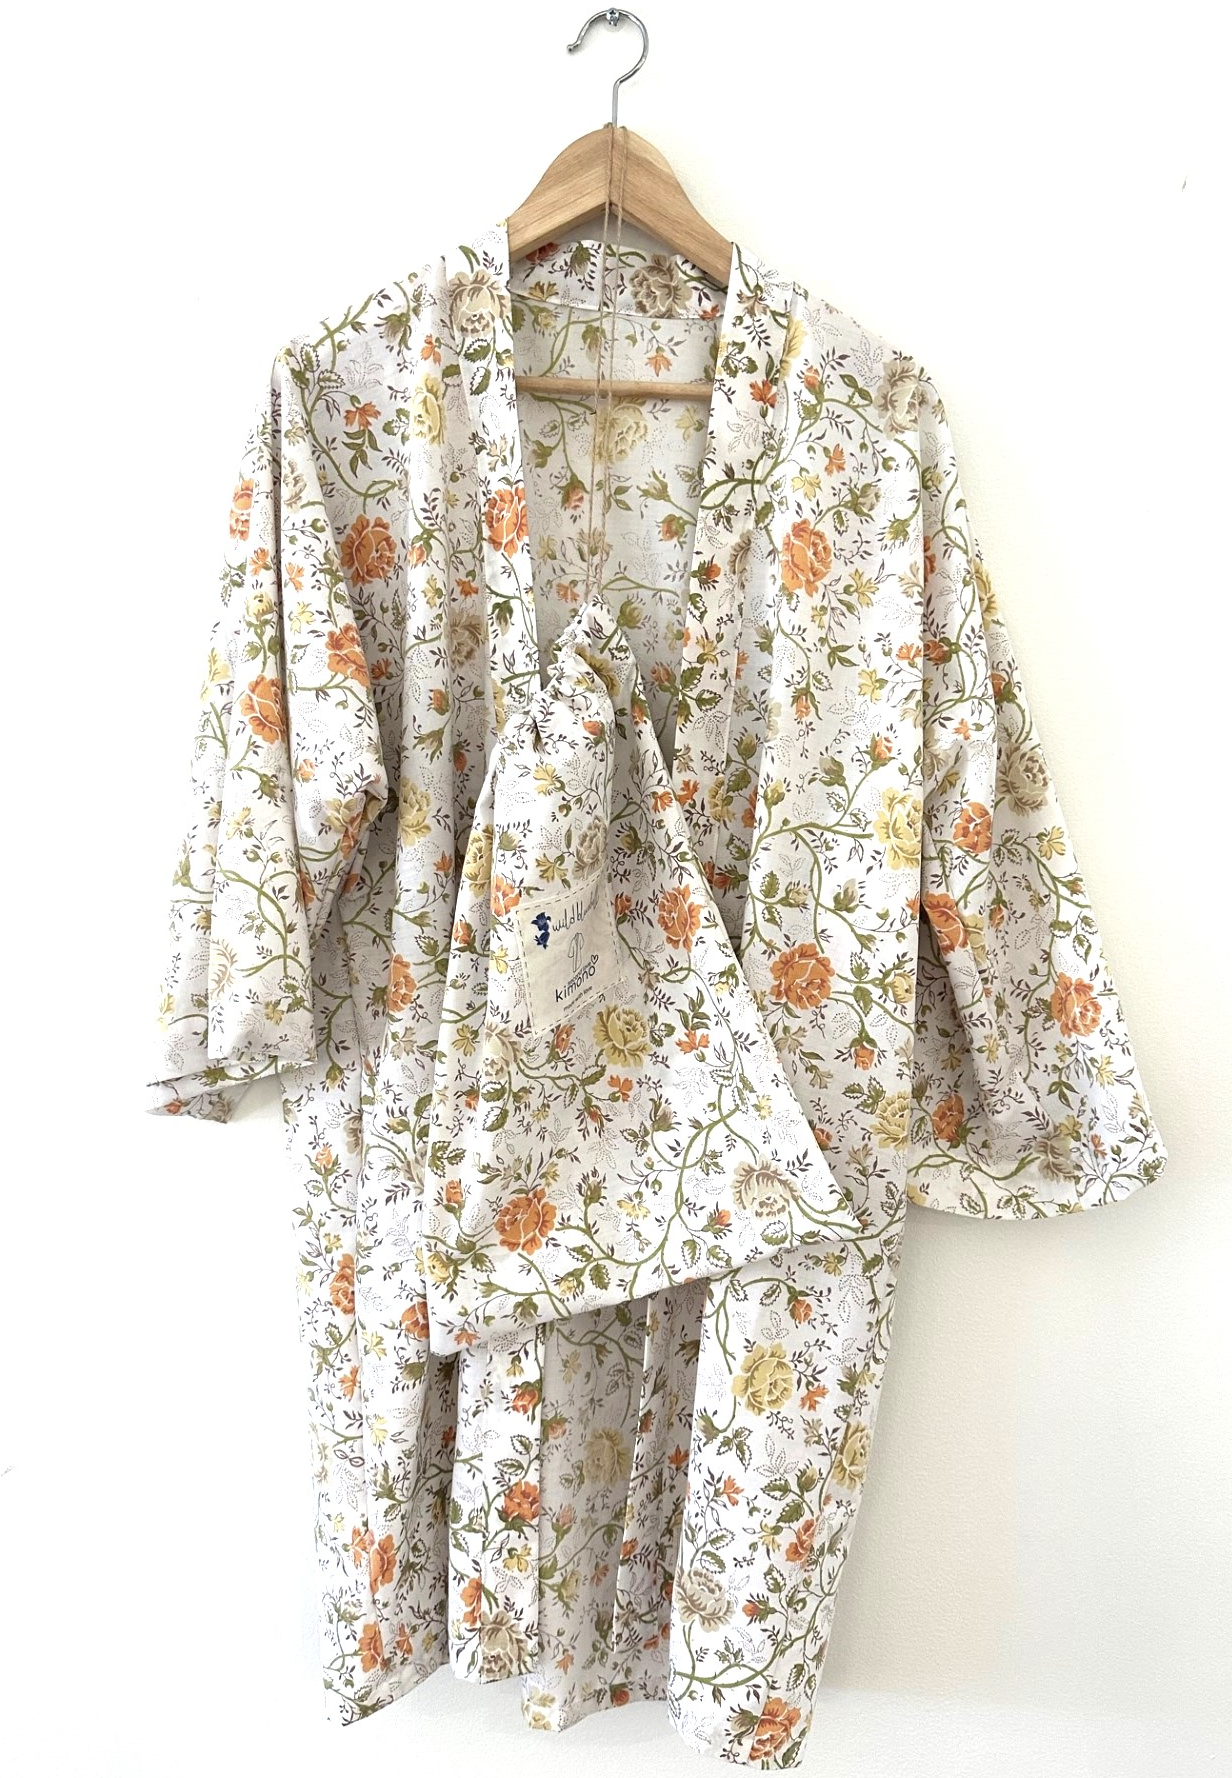 buy hand made vintage fabric kimonos online in canada